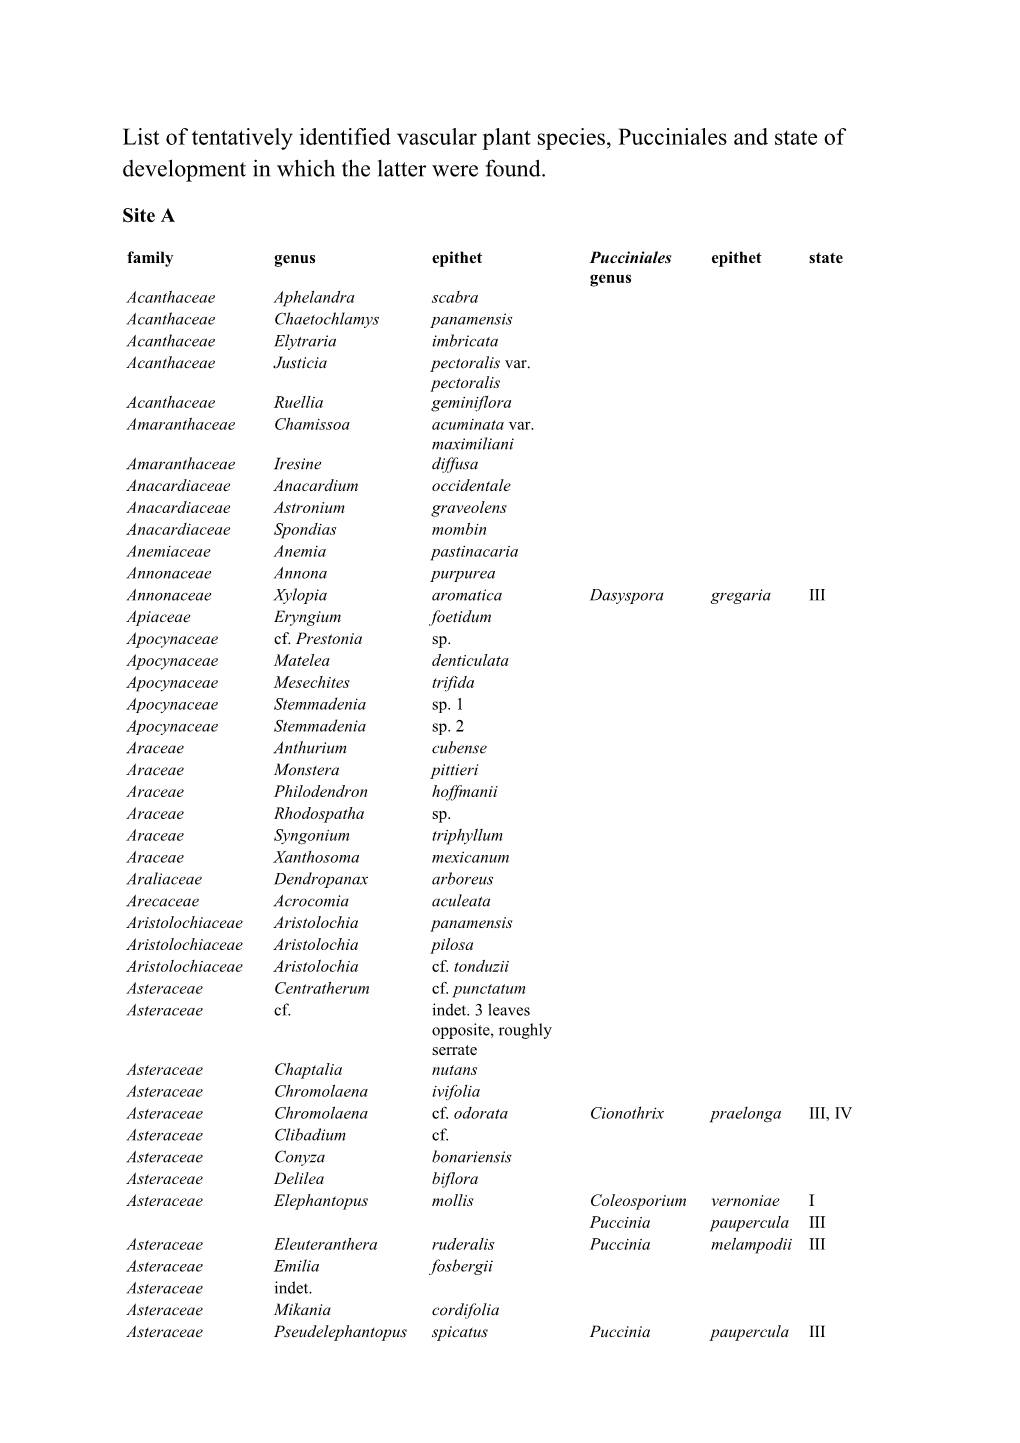 List of Tentatively Identified Vascular Plant Species, Pucciniales and State of Development